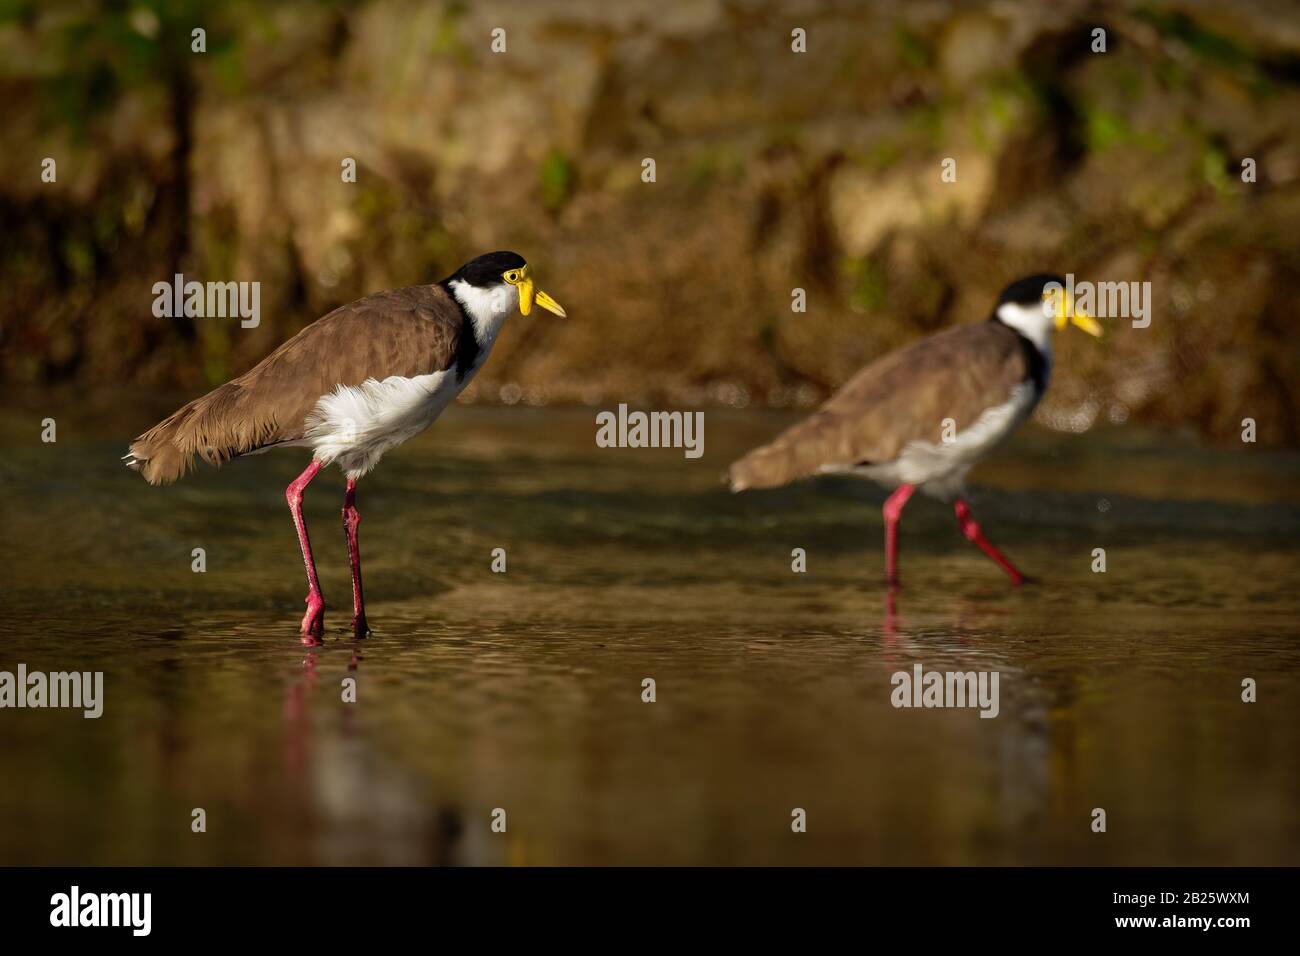 Vanellus miles - Masked Lapwing, wader from Australia and New Zealand. Shore bird with yellow beak, brown back and wings and red legs staying in the w Stock Photo